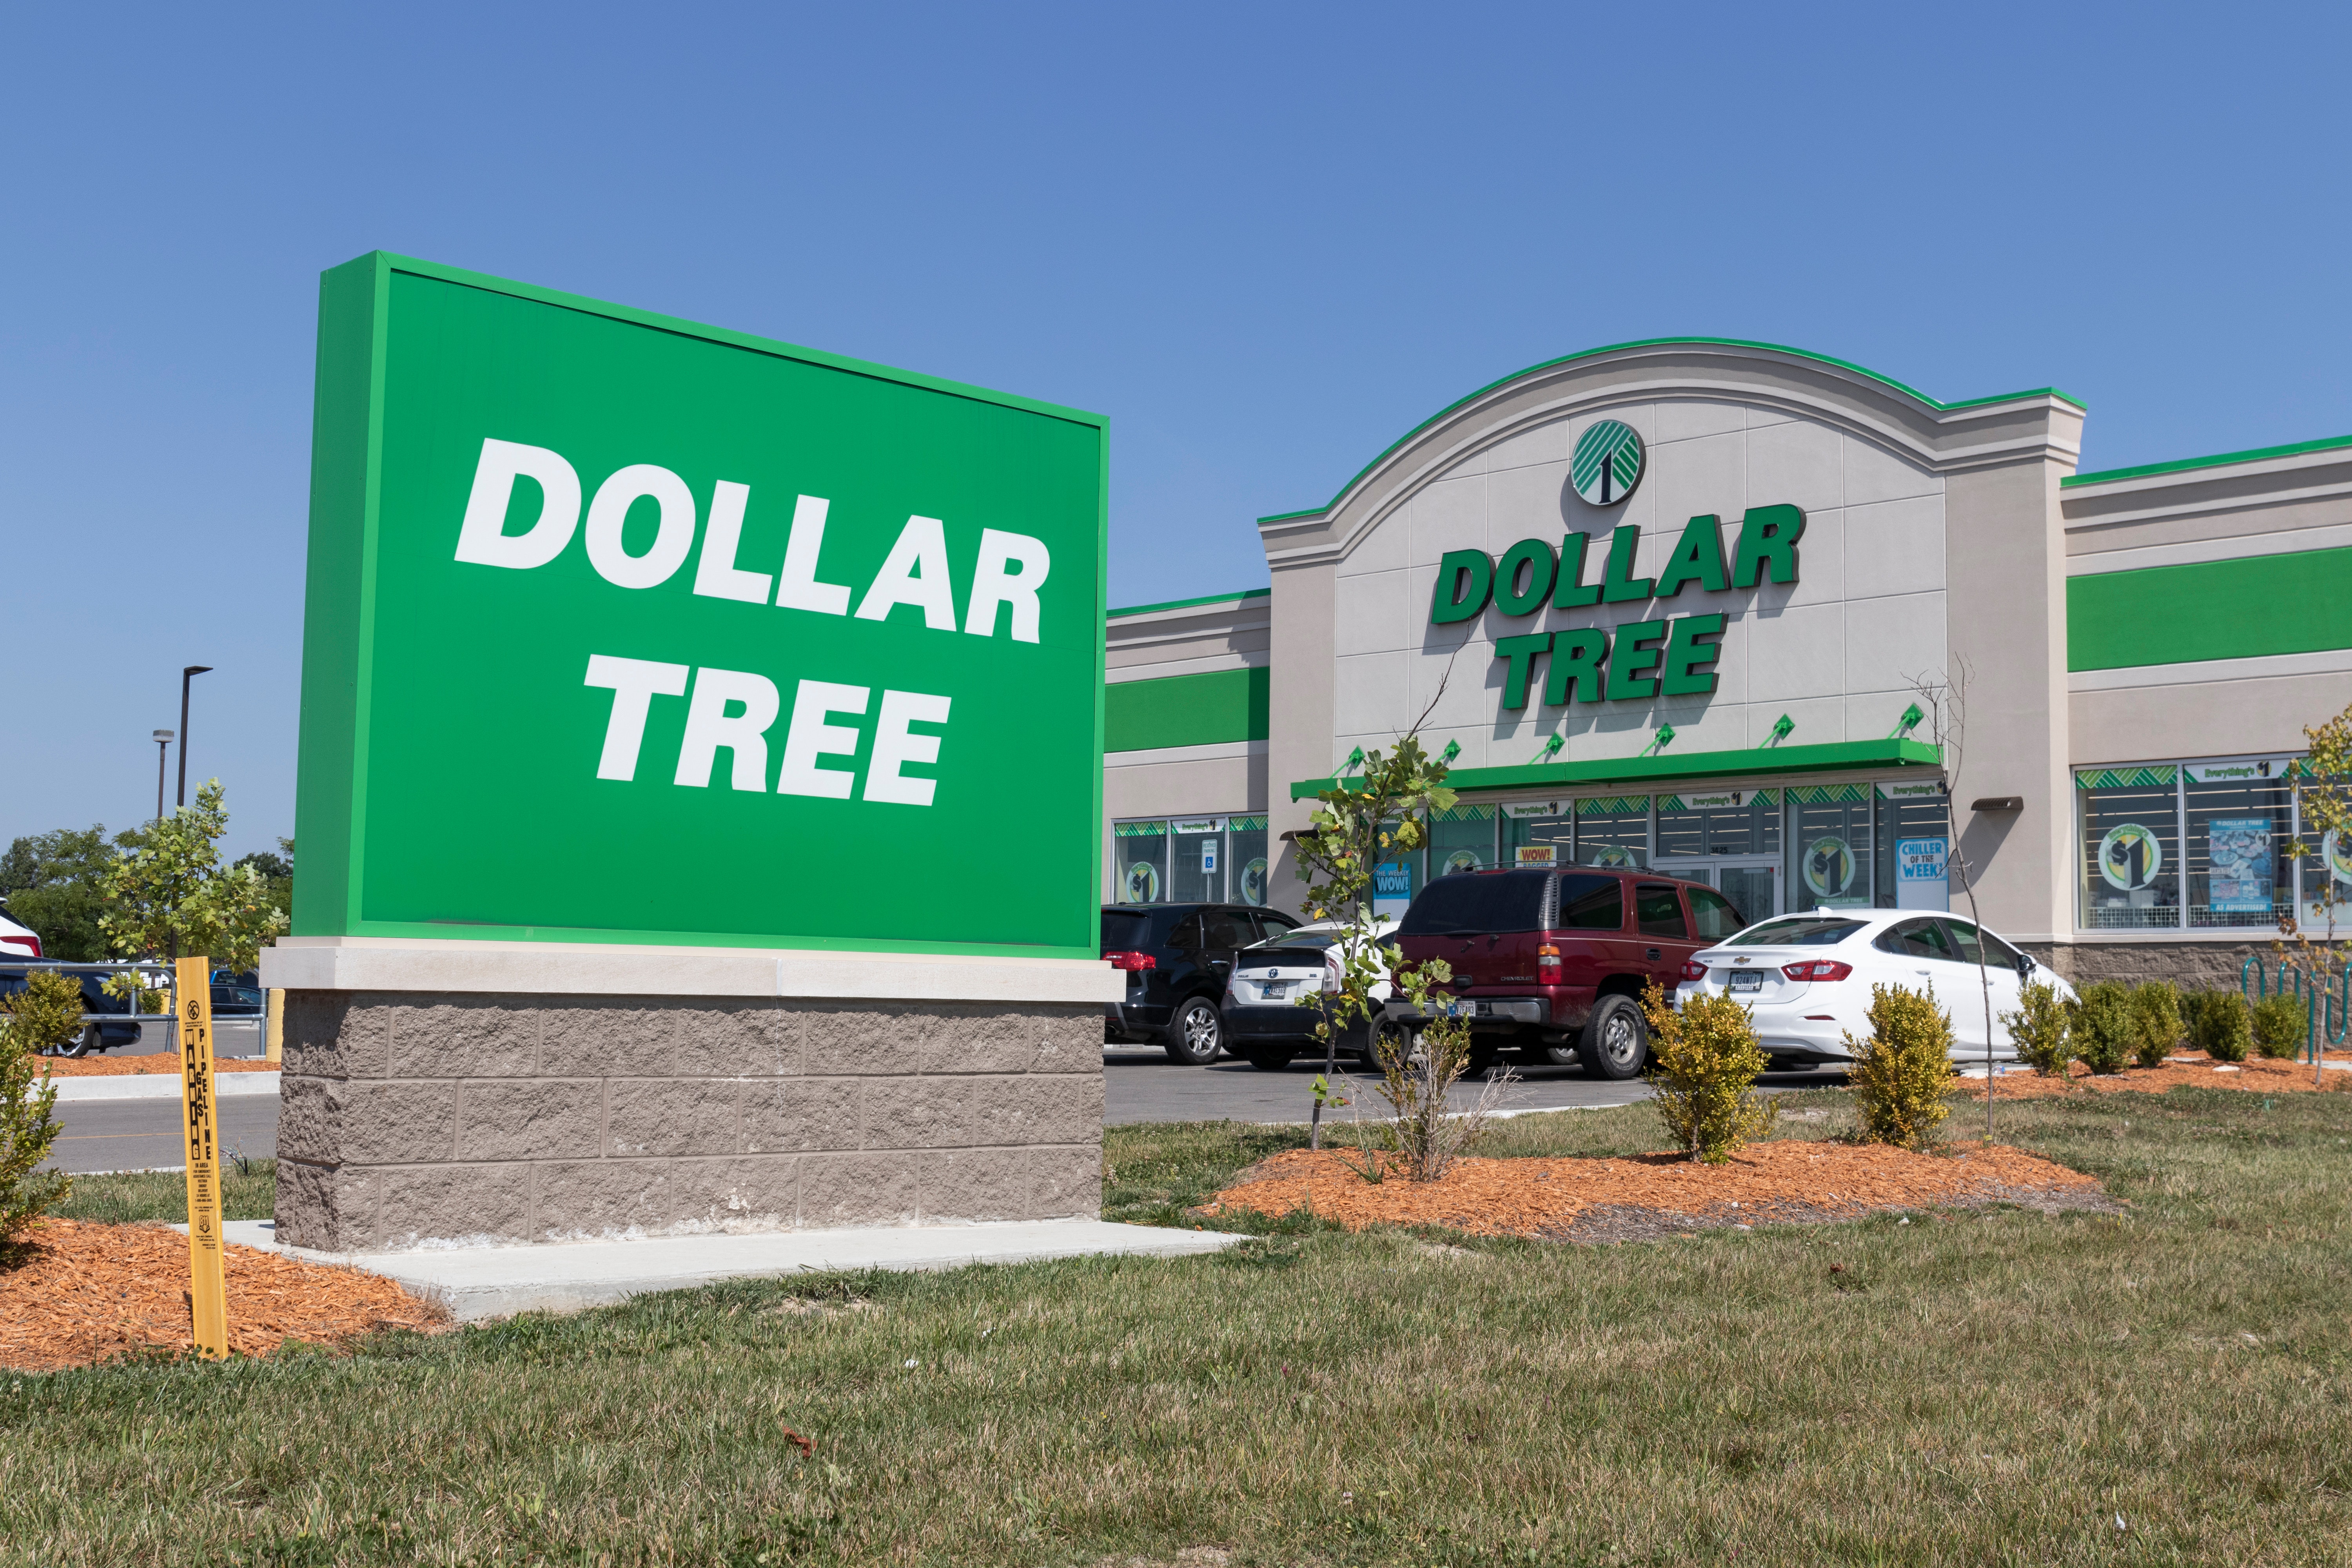 Can Dollar Tree Rebound On Strength Of Frugal Consumers?